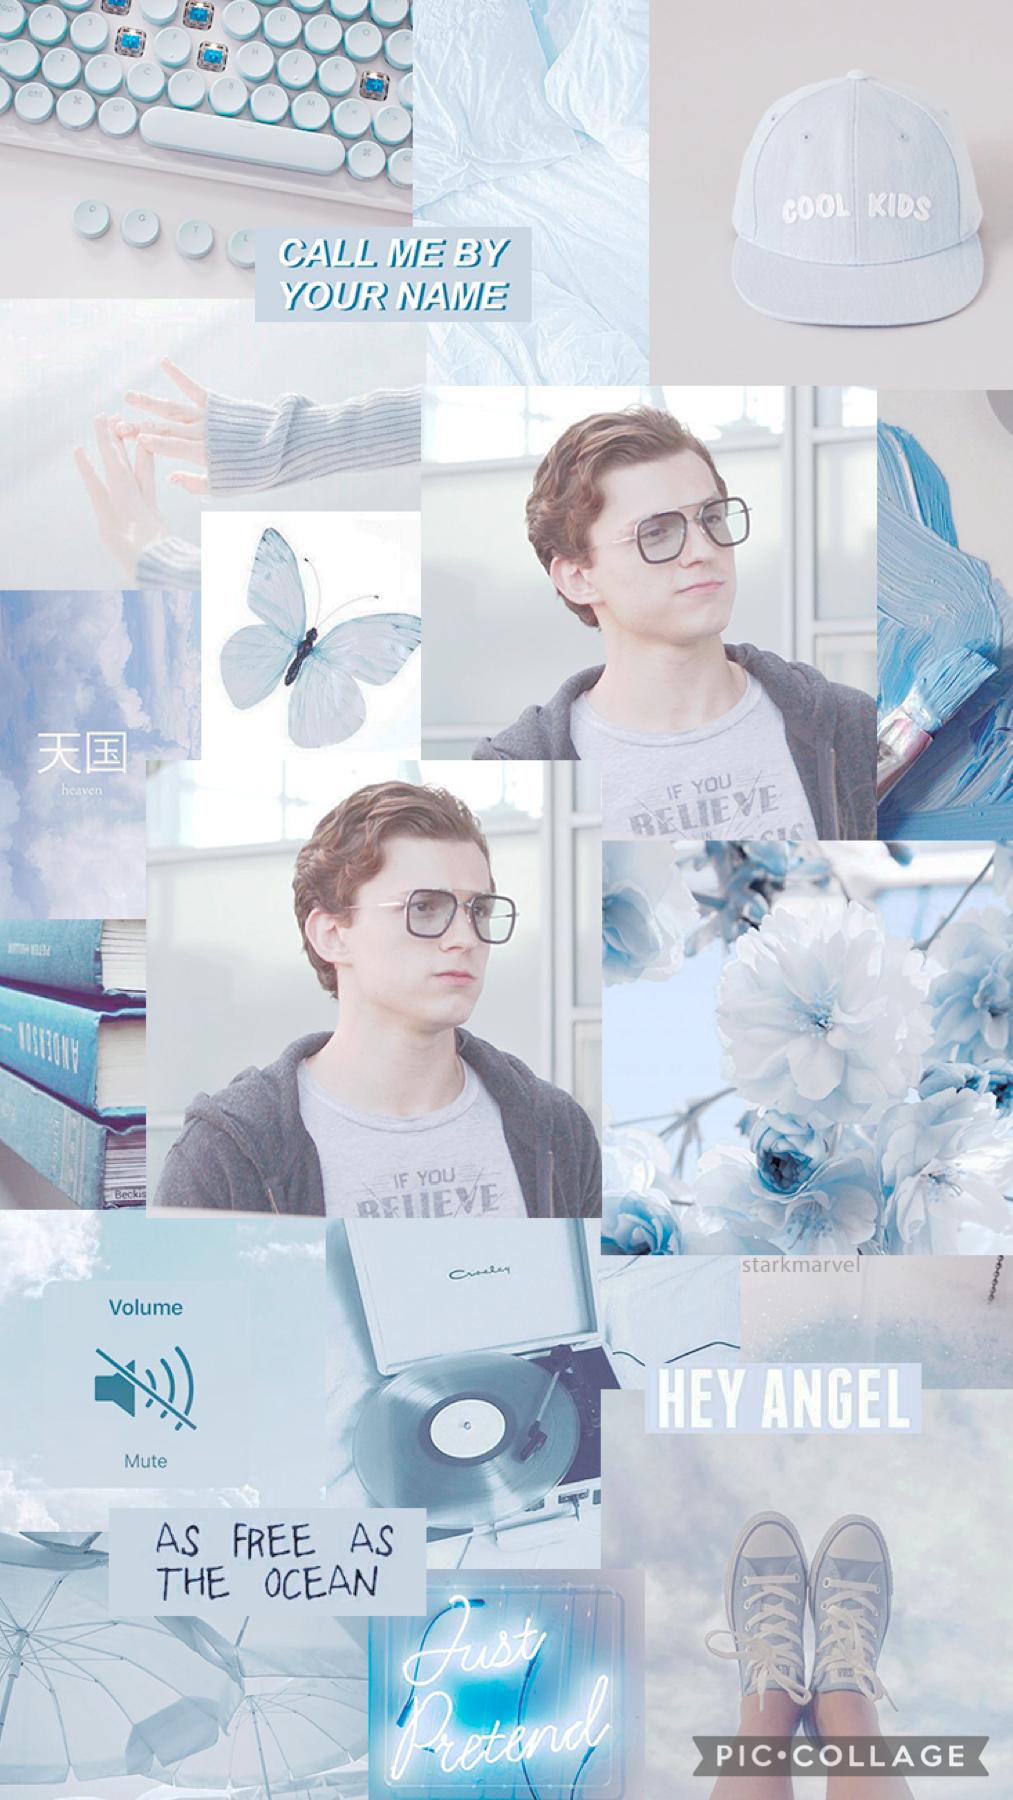 💙tap💙
Tom holland is so cute! This is my new wallpaper!